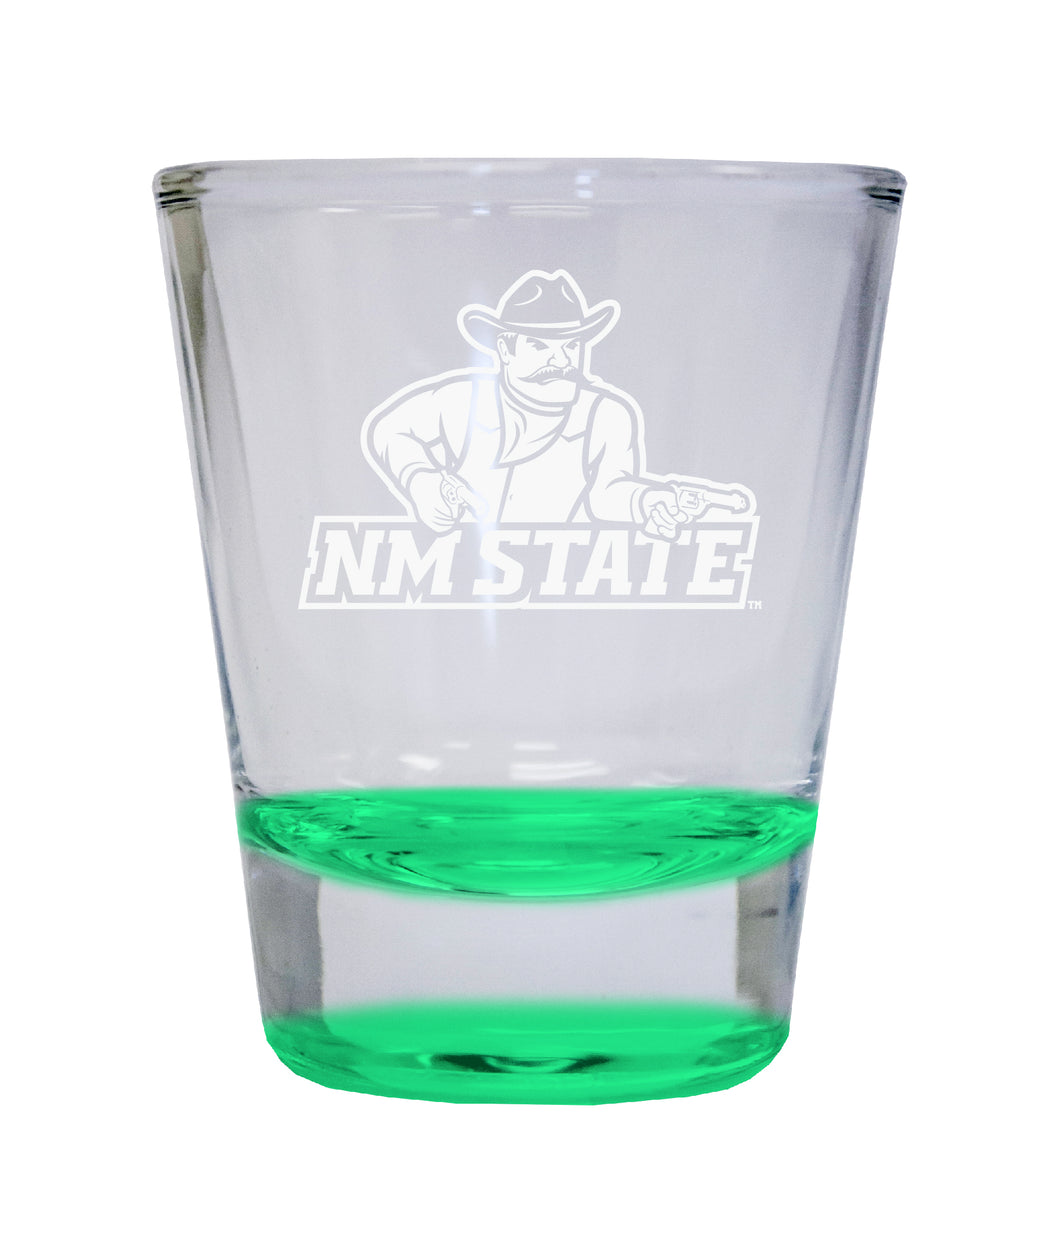 New Mexico State University Pistol Pete Etched Round Shot Glass 2 oz Green